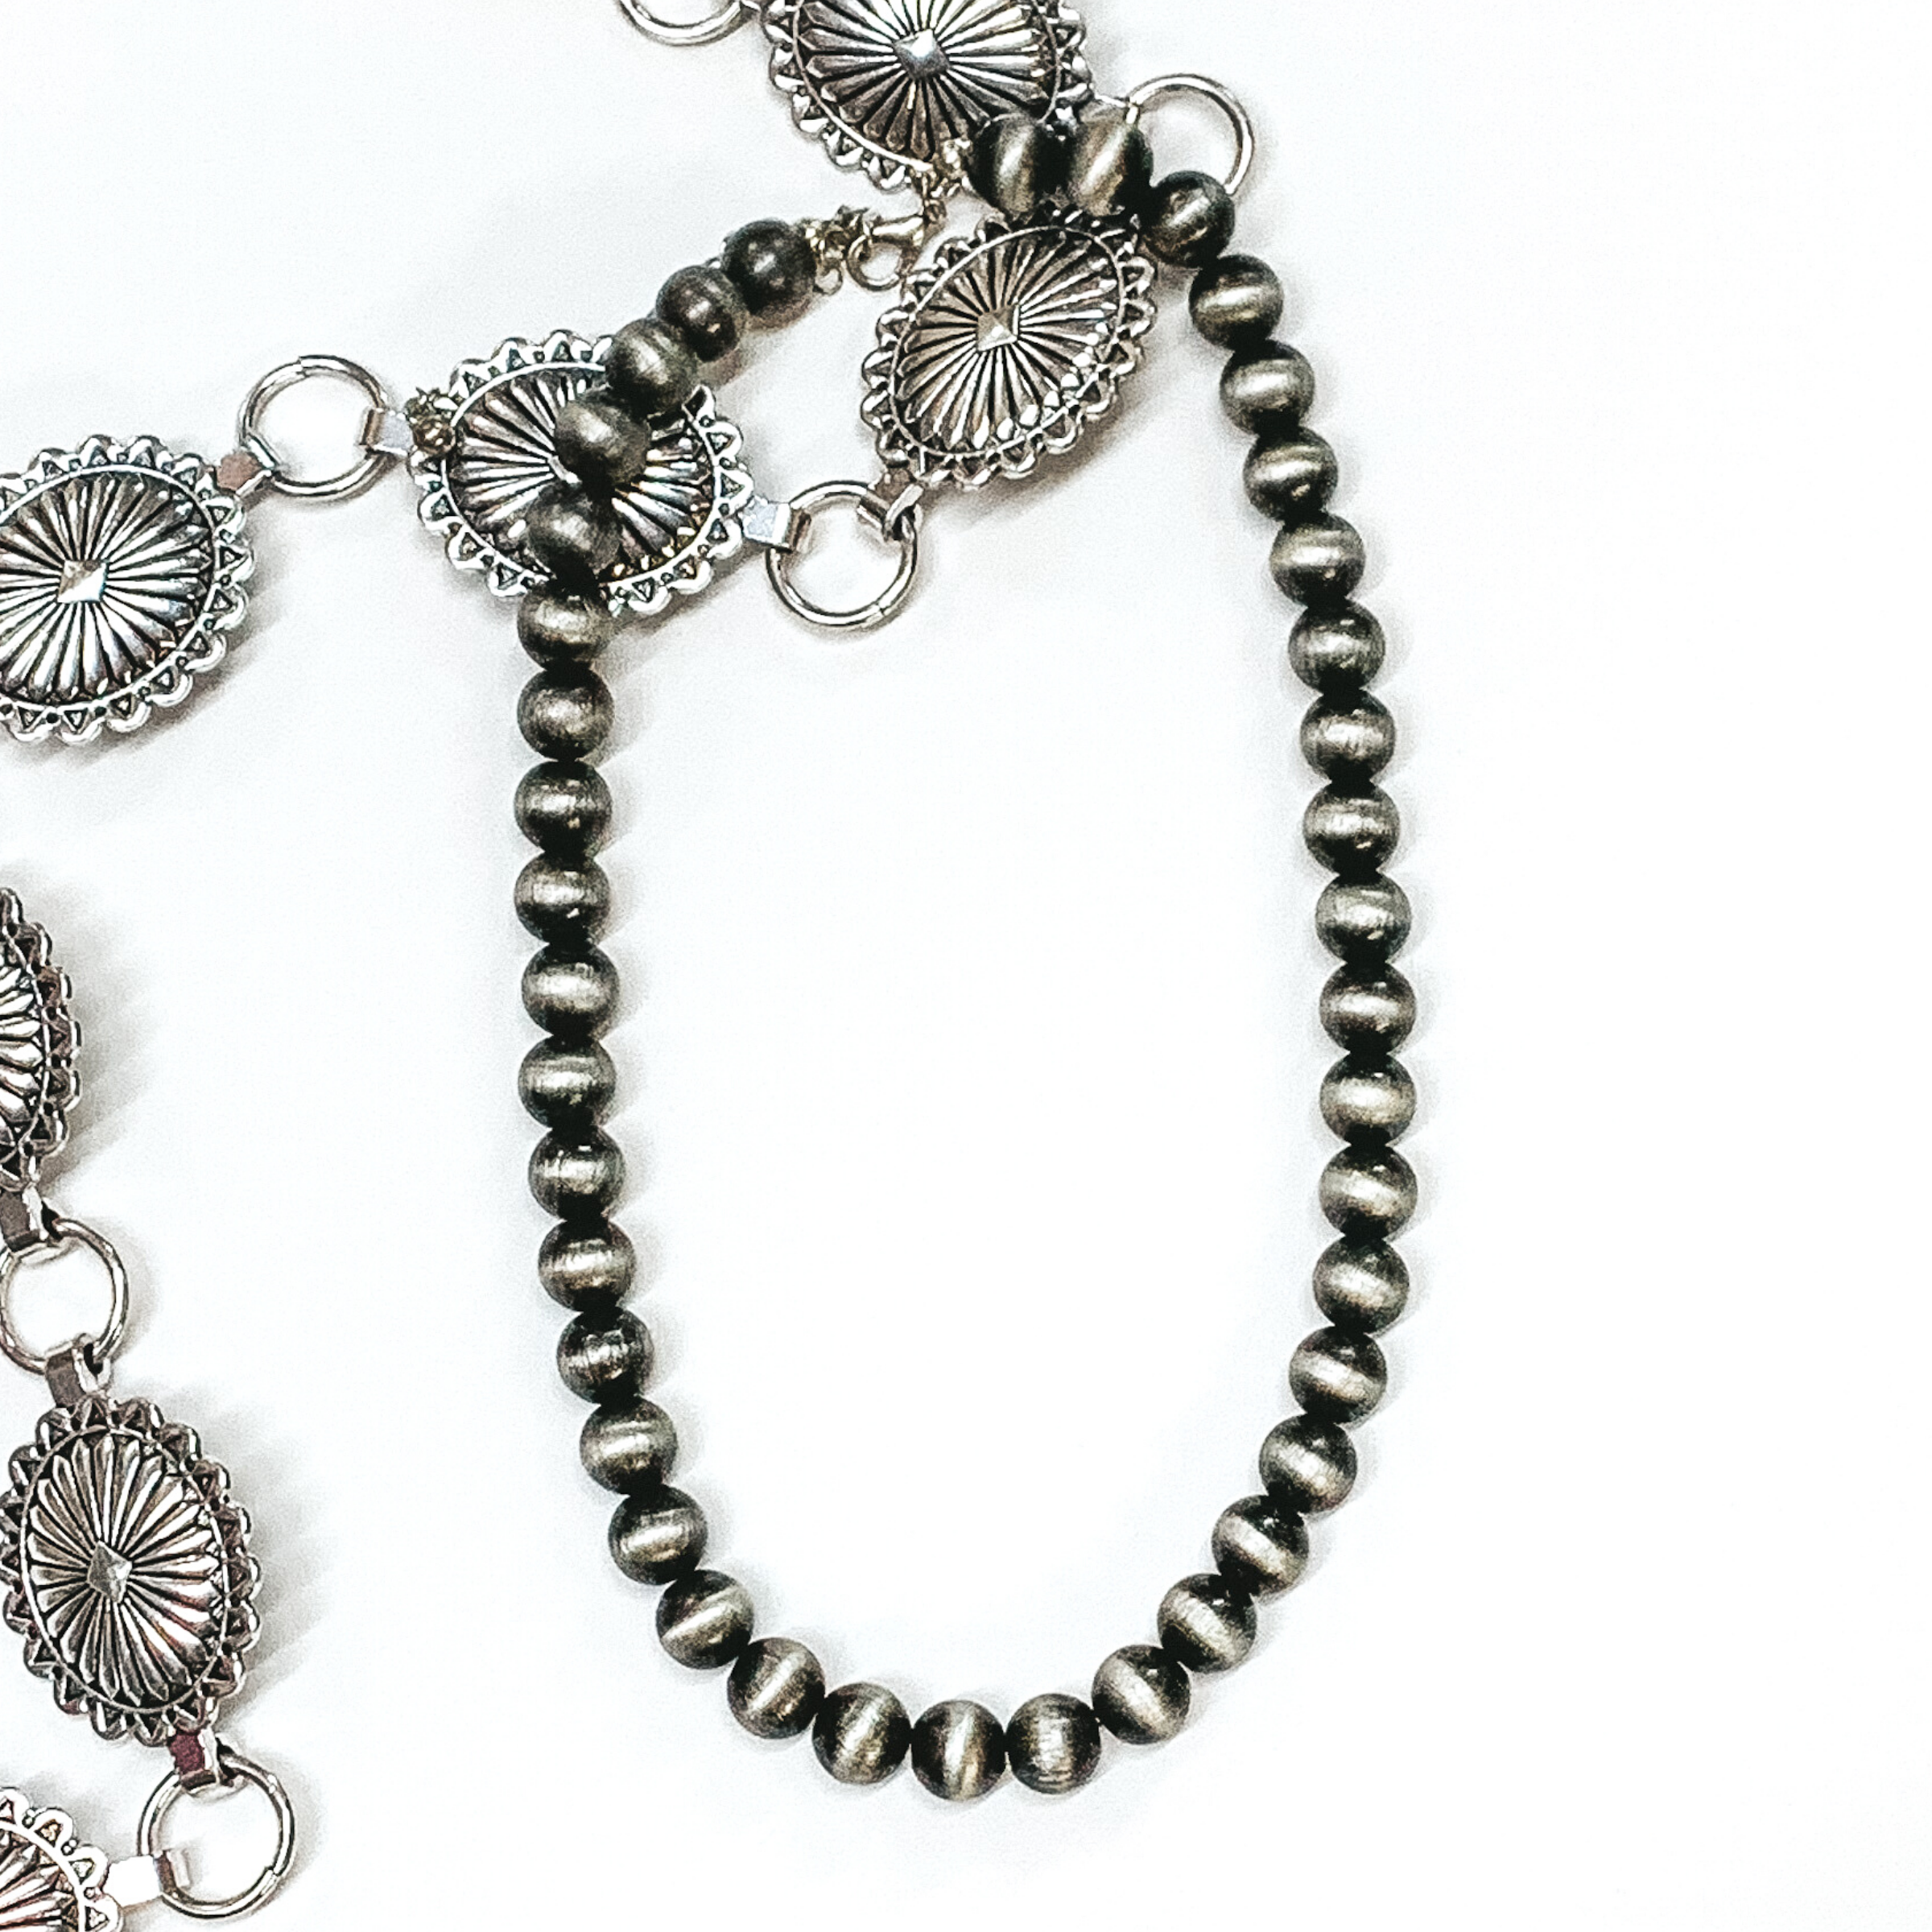 Silver beaded necklace pictured on a white background with silver conchos as decoration.  